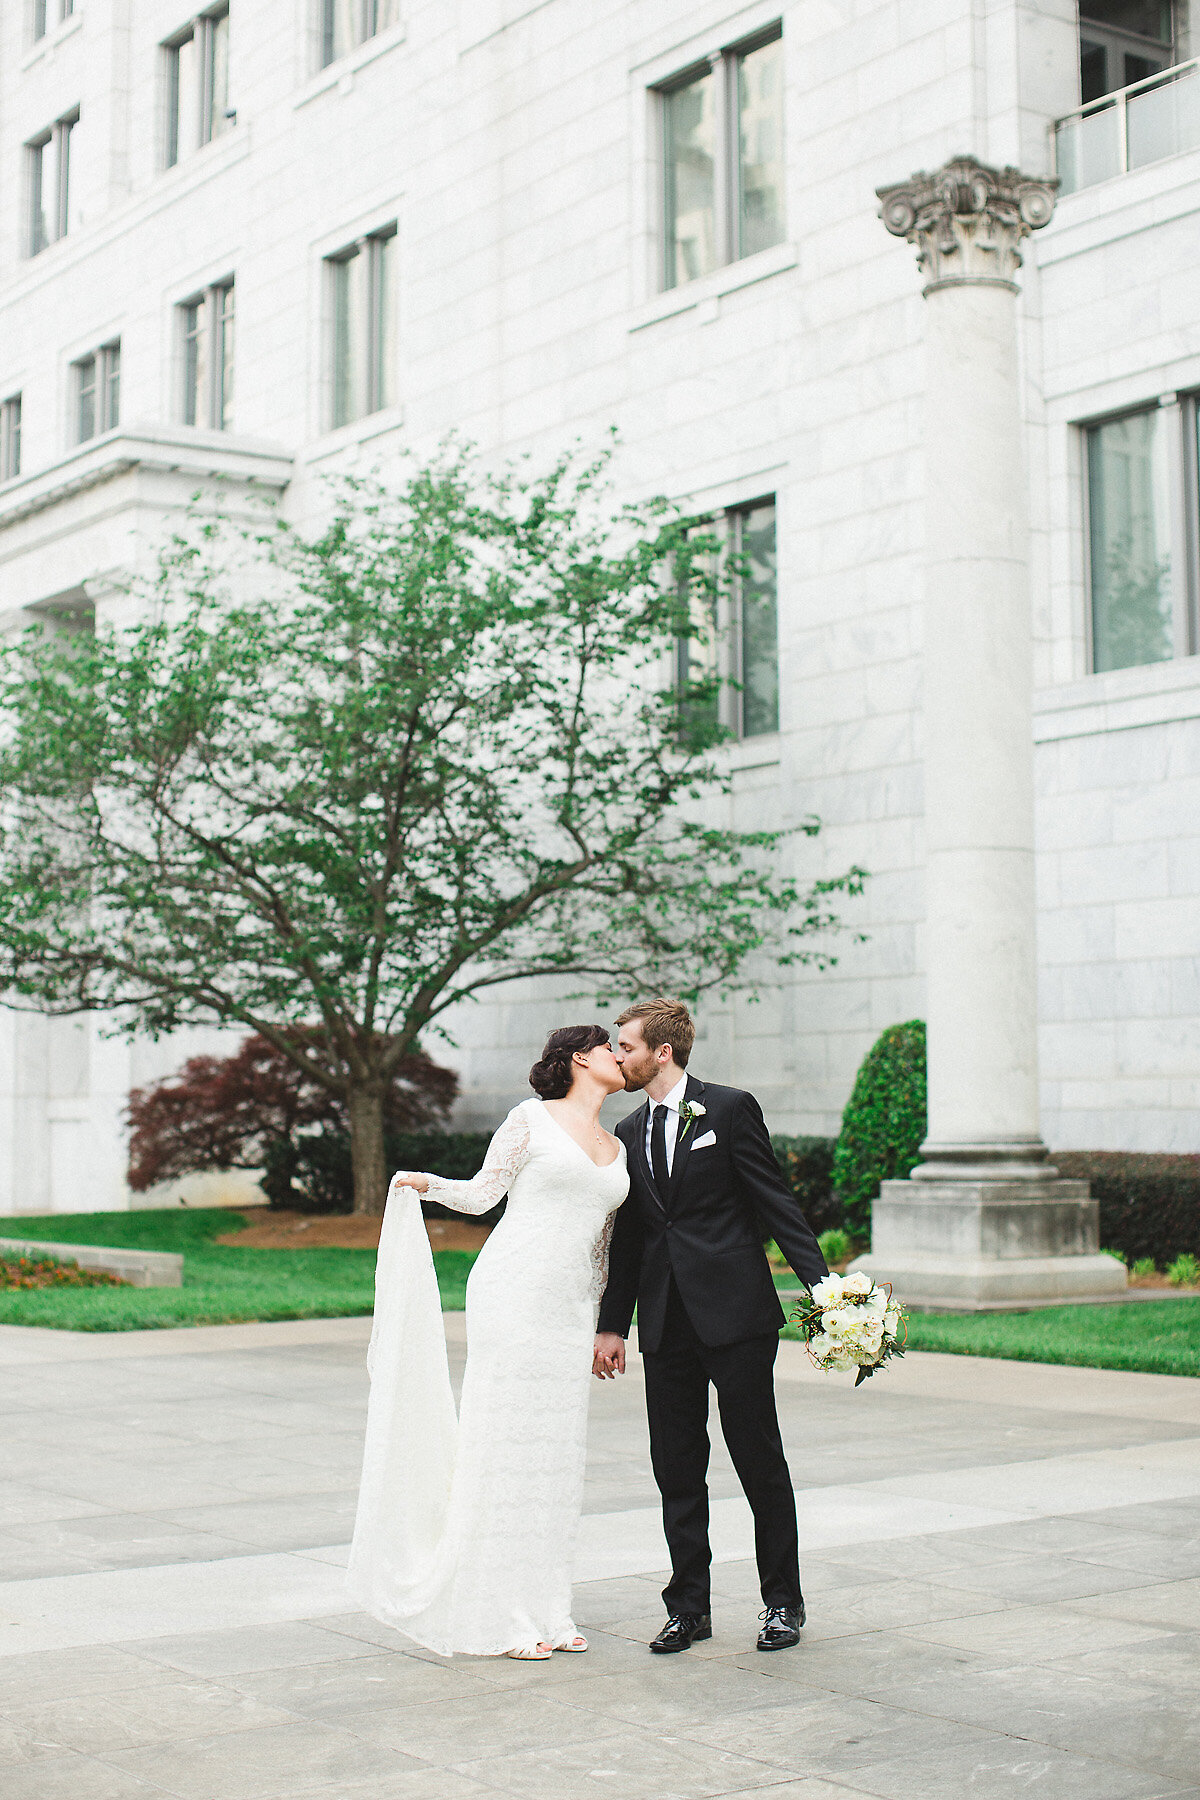 Bride and groom kissing in front of courthouse.